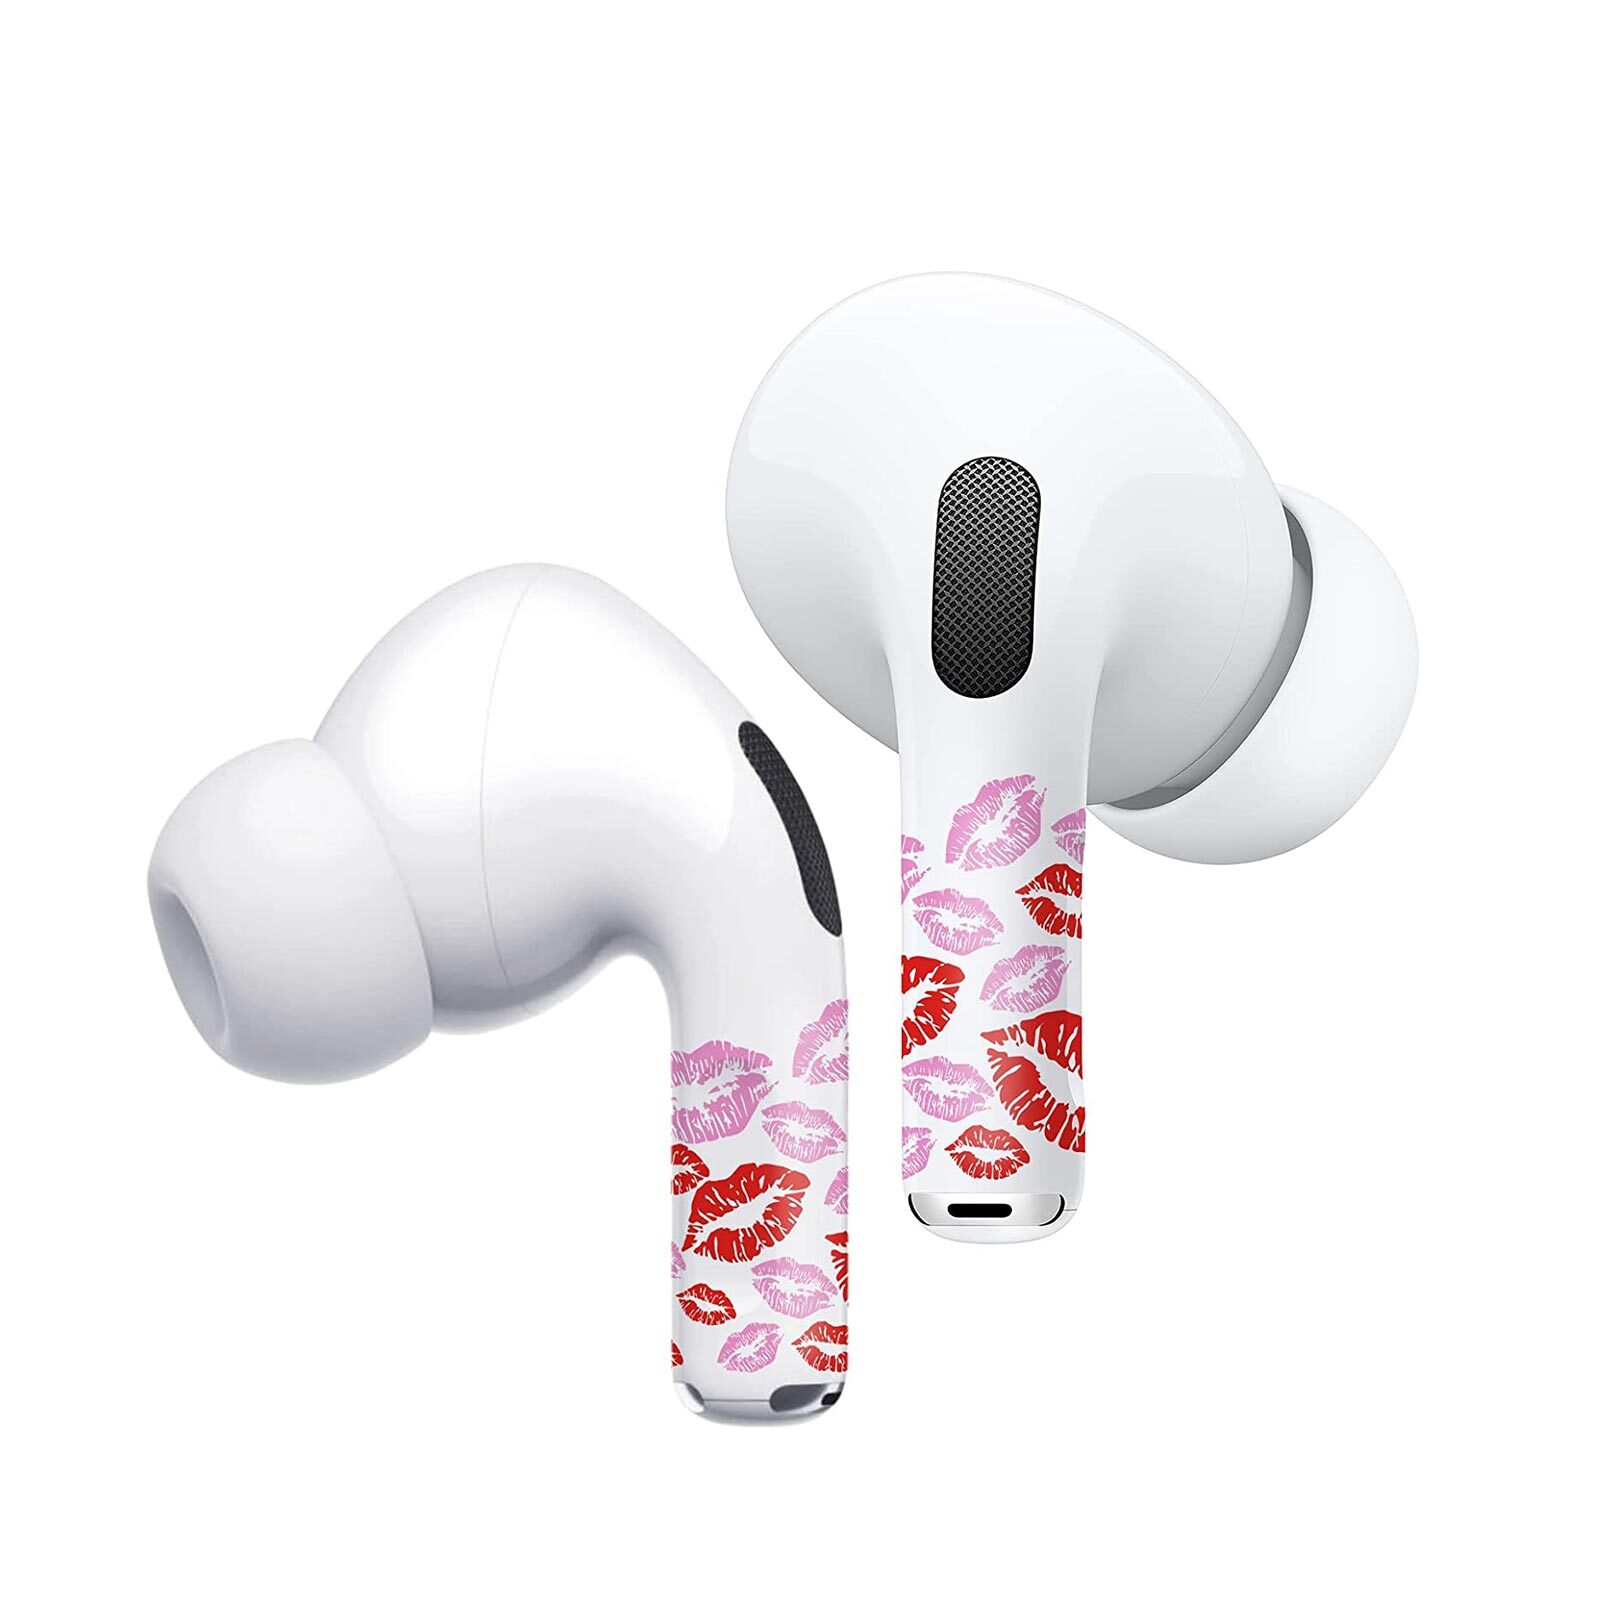 RockMax AirPods Pro Skin Wrap Sticker for Apple AirPods Pro 2 / 1